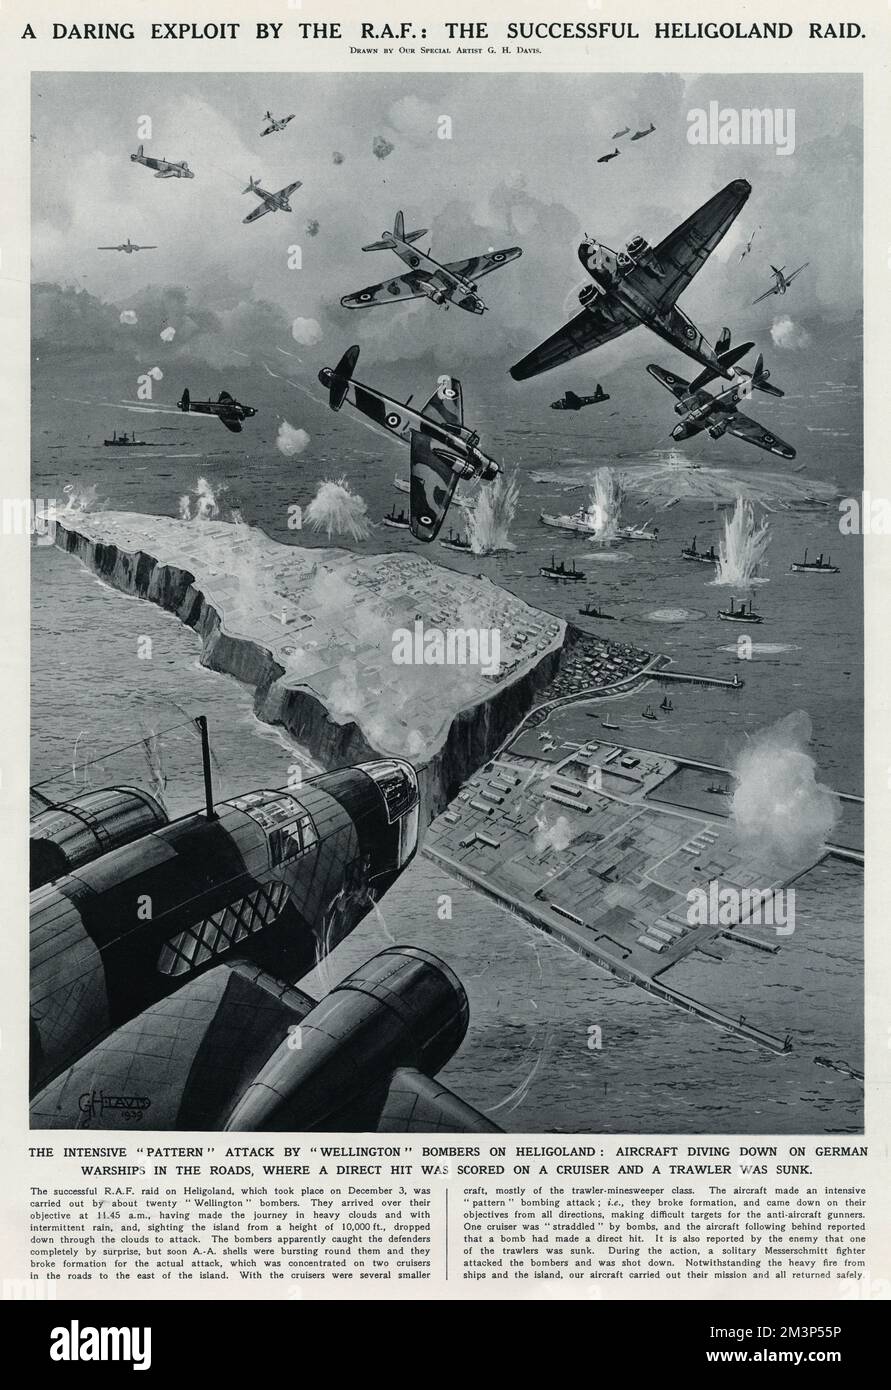 A daring exploit by the RAF: the successful Heligoland raid.  The intensive 'pattern' attack by Wellington bombers on Heligoland: aircraft diving down on German warships.  A direct hit was scored on a cruiser and a trawler was sunk.      Date: 3 December 1939 Stock Photo